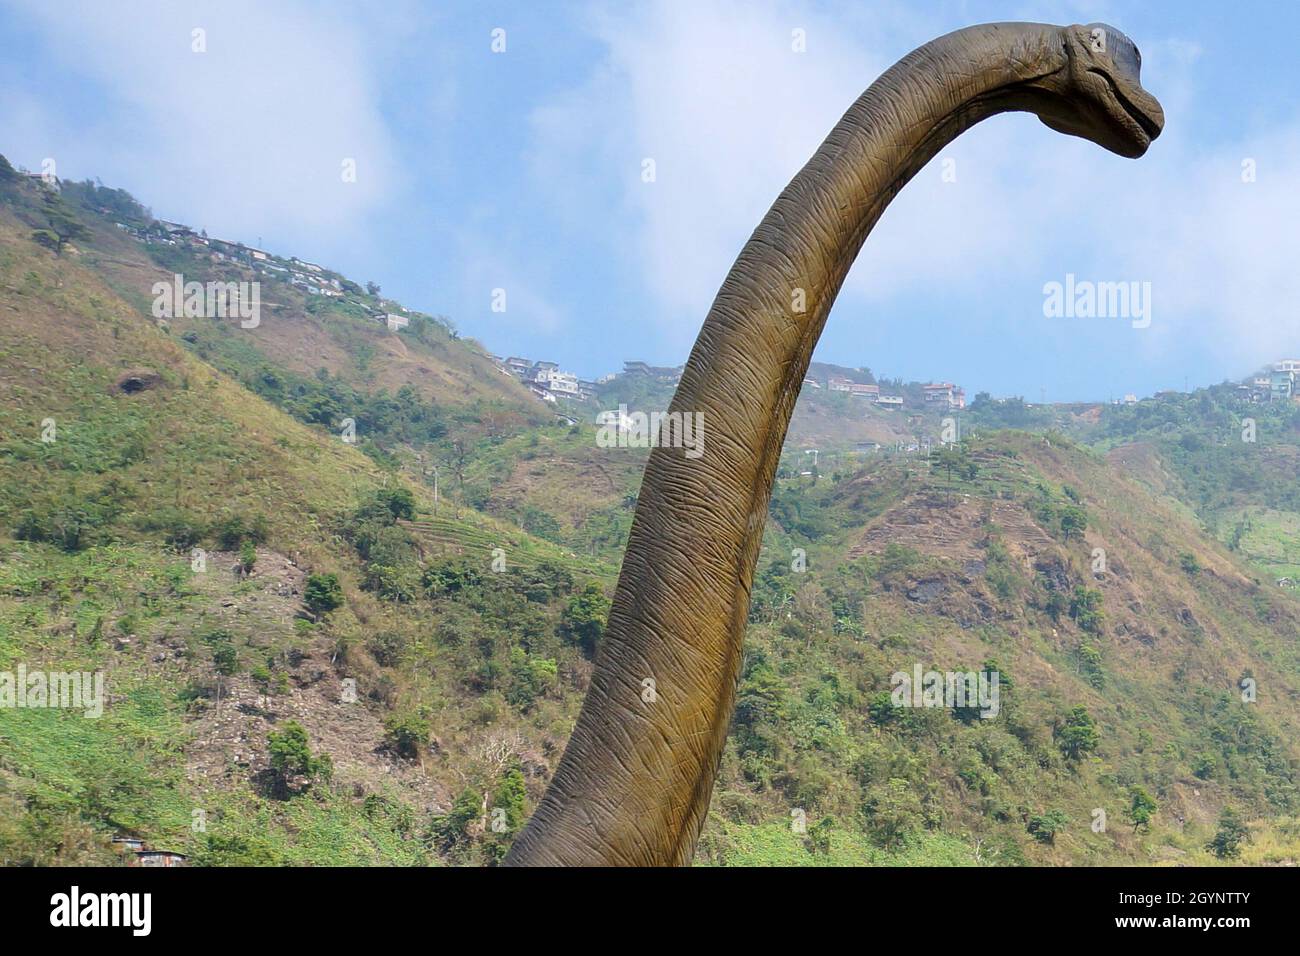 Replica of a dinosaur with long neck displayed in a park in Benguet, Philippines, Southeast Asia. Photo taken on February 25, 2015. Stock Photo